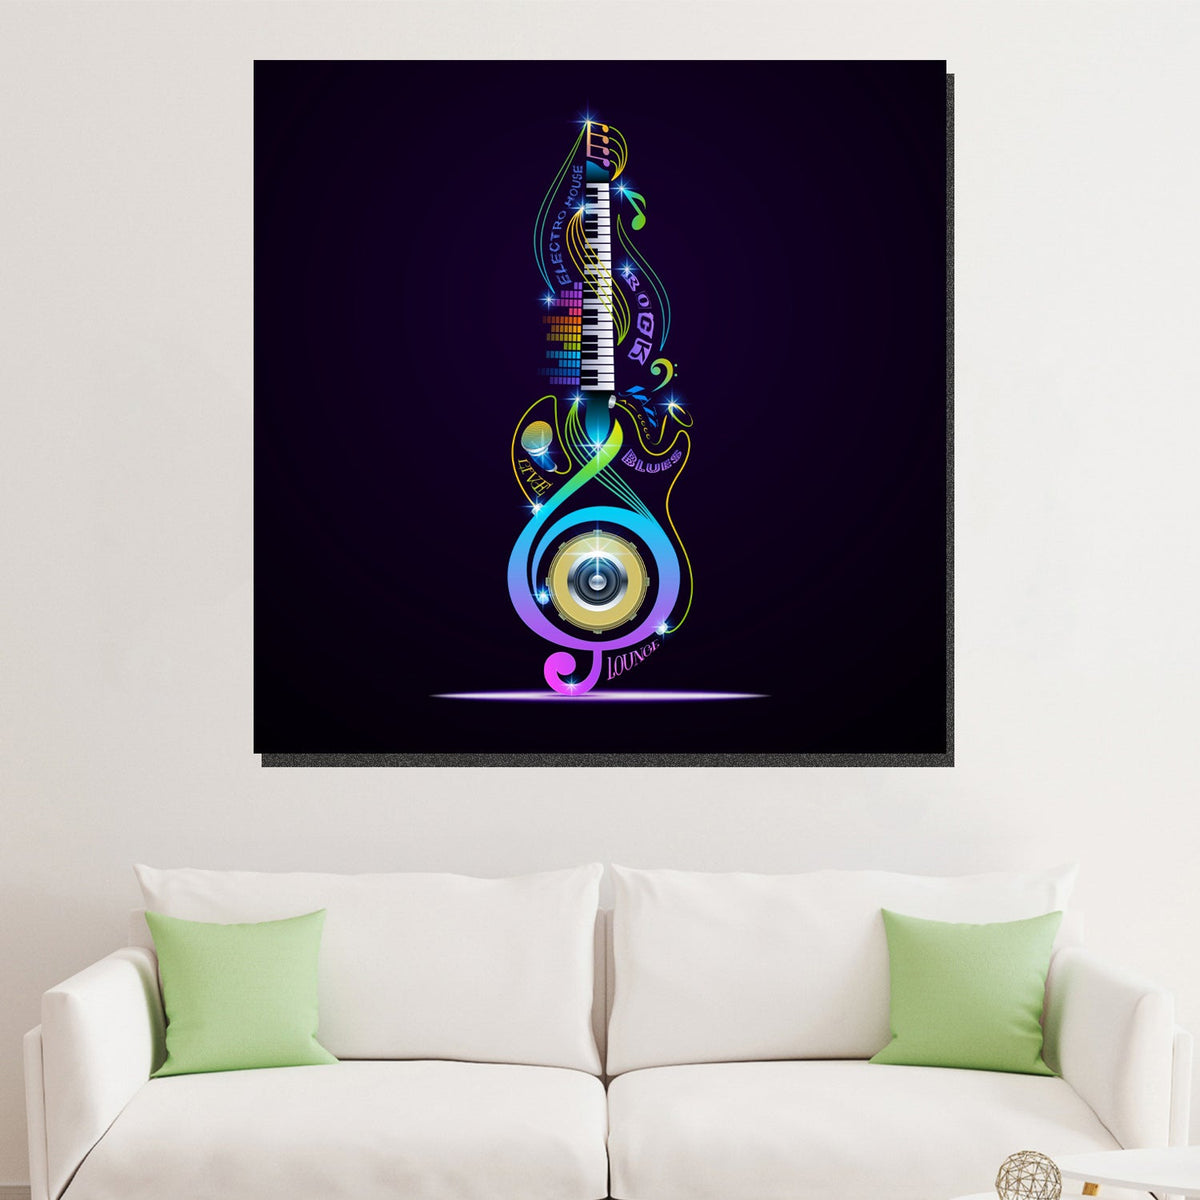 https://cdn.shopify.com/s/files/1/0387/9986/8044/products/MusicalCollageCanvasArtprintStretched-3.jpg